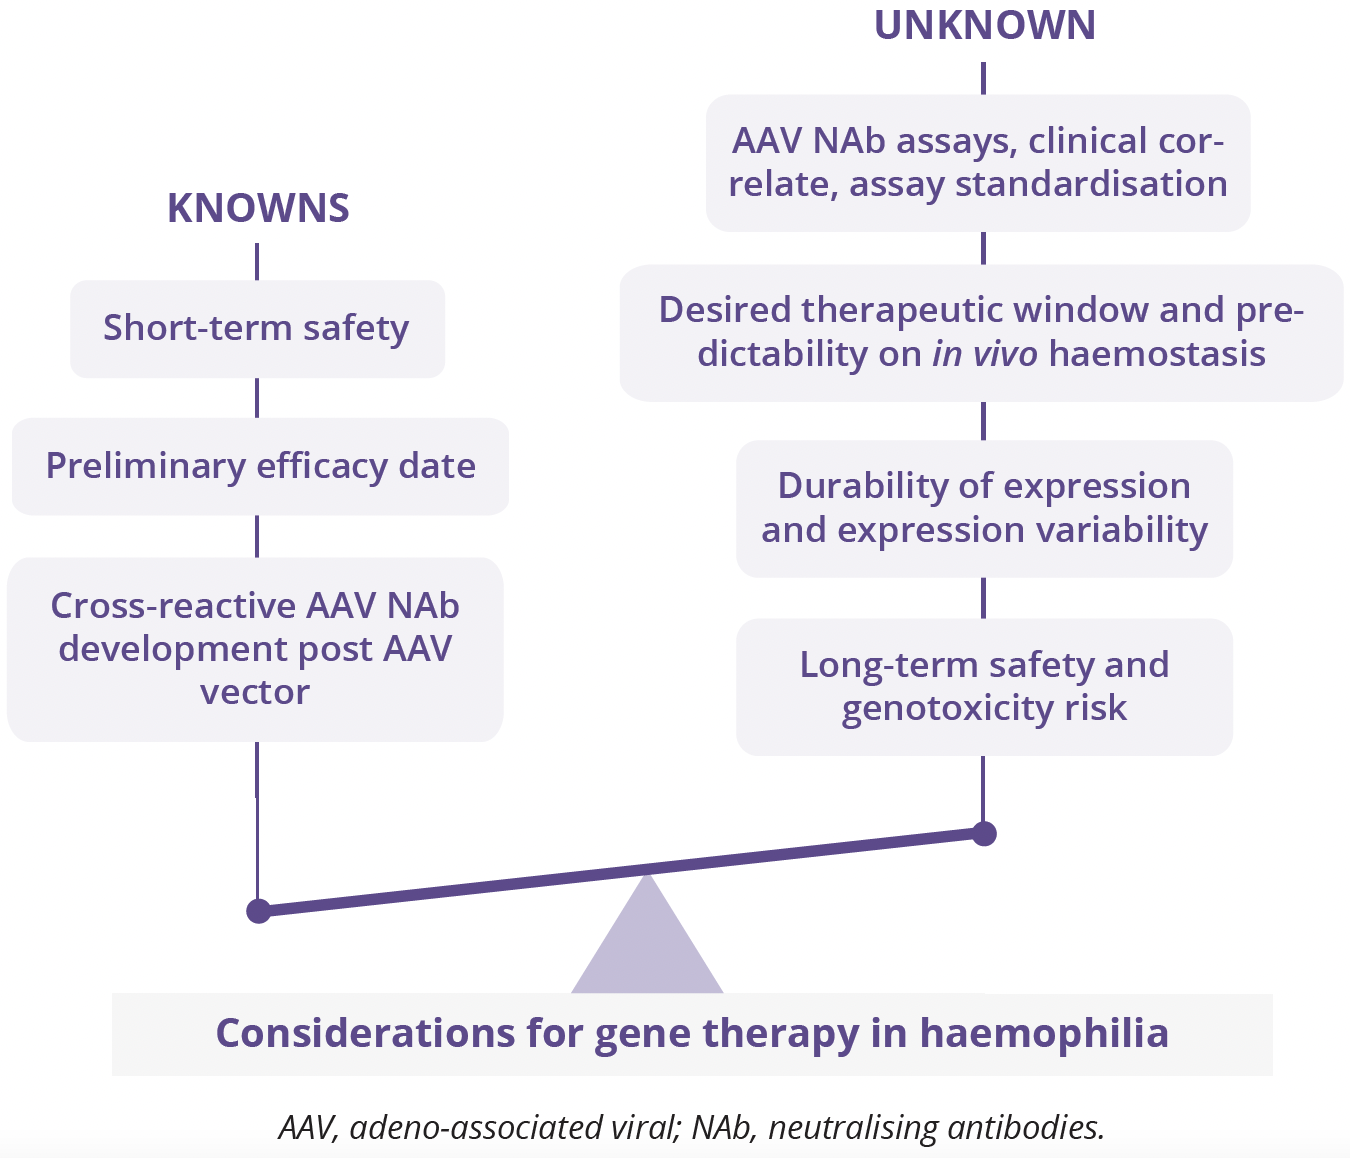 Known and unknown considerations for gene therapy in haemophilia